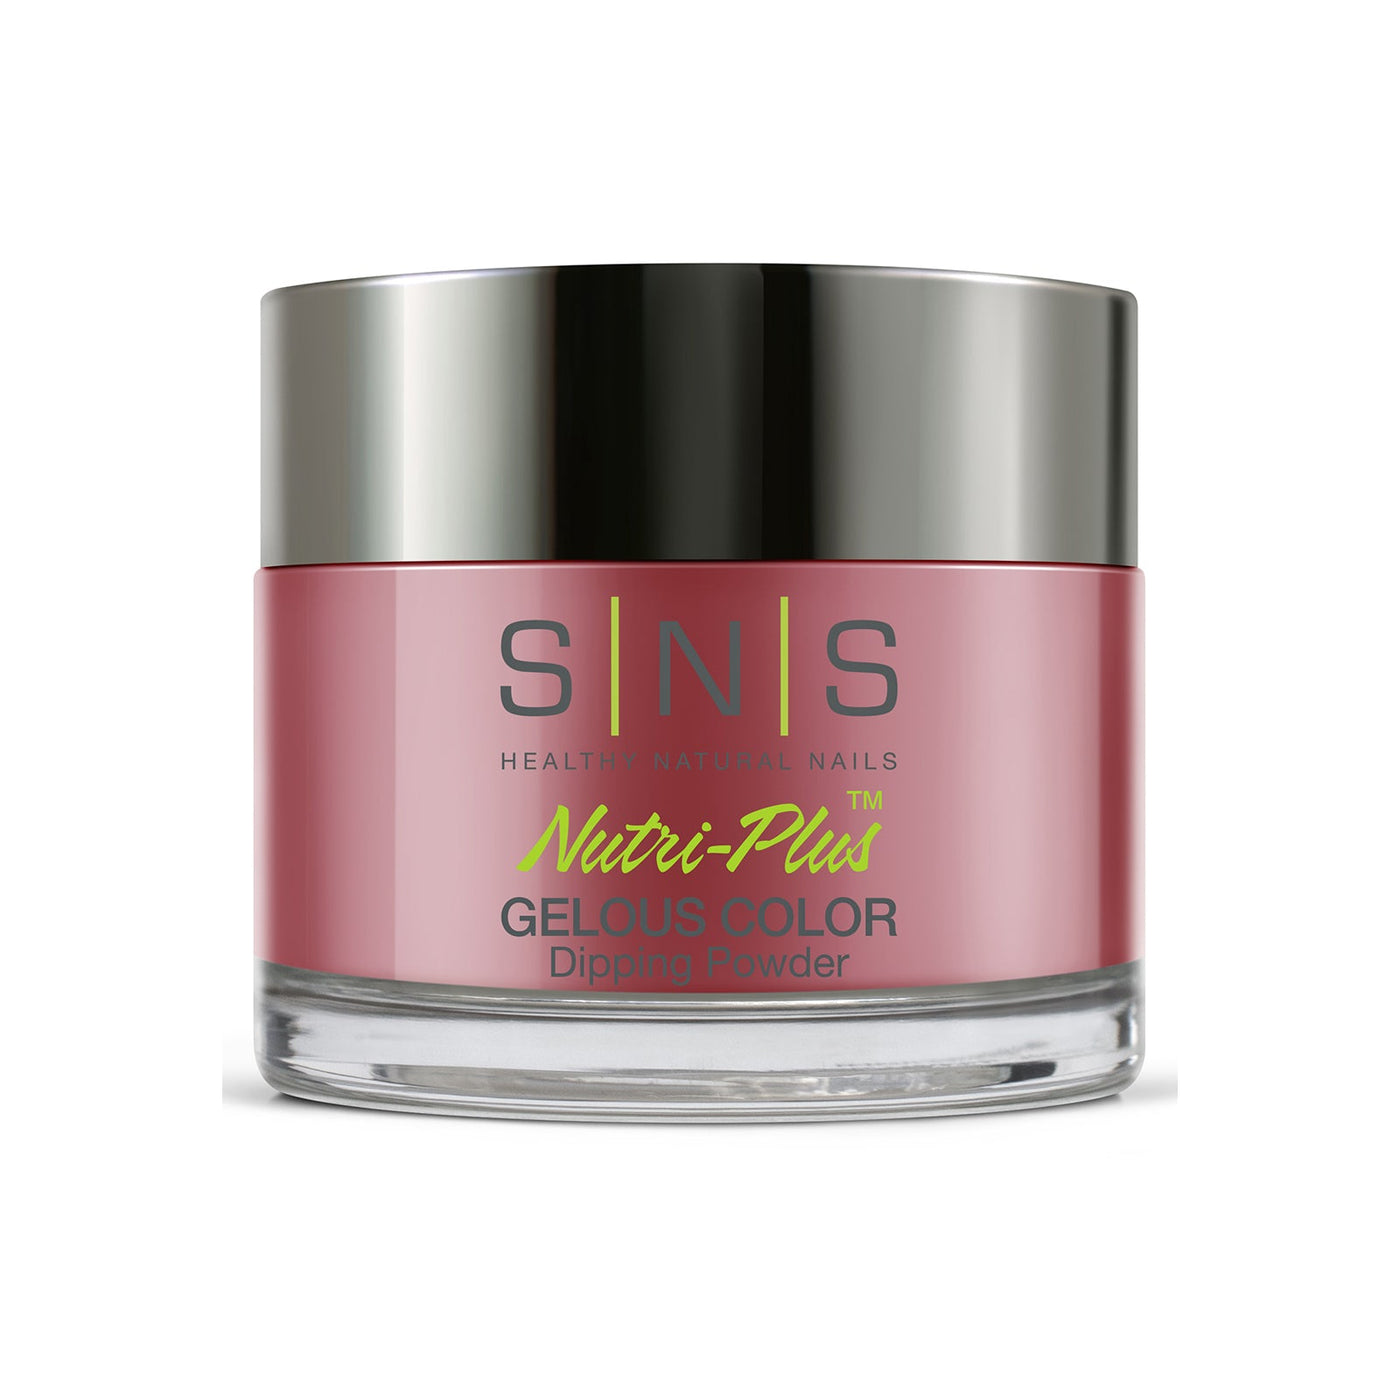 SNS Gelous Color Dipping Powder DW11 Grace Bay (43g) packaging